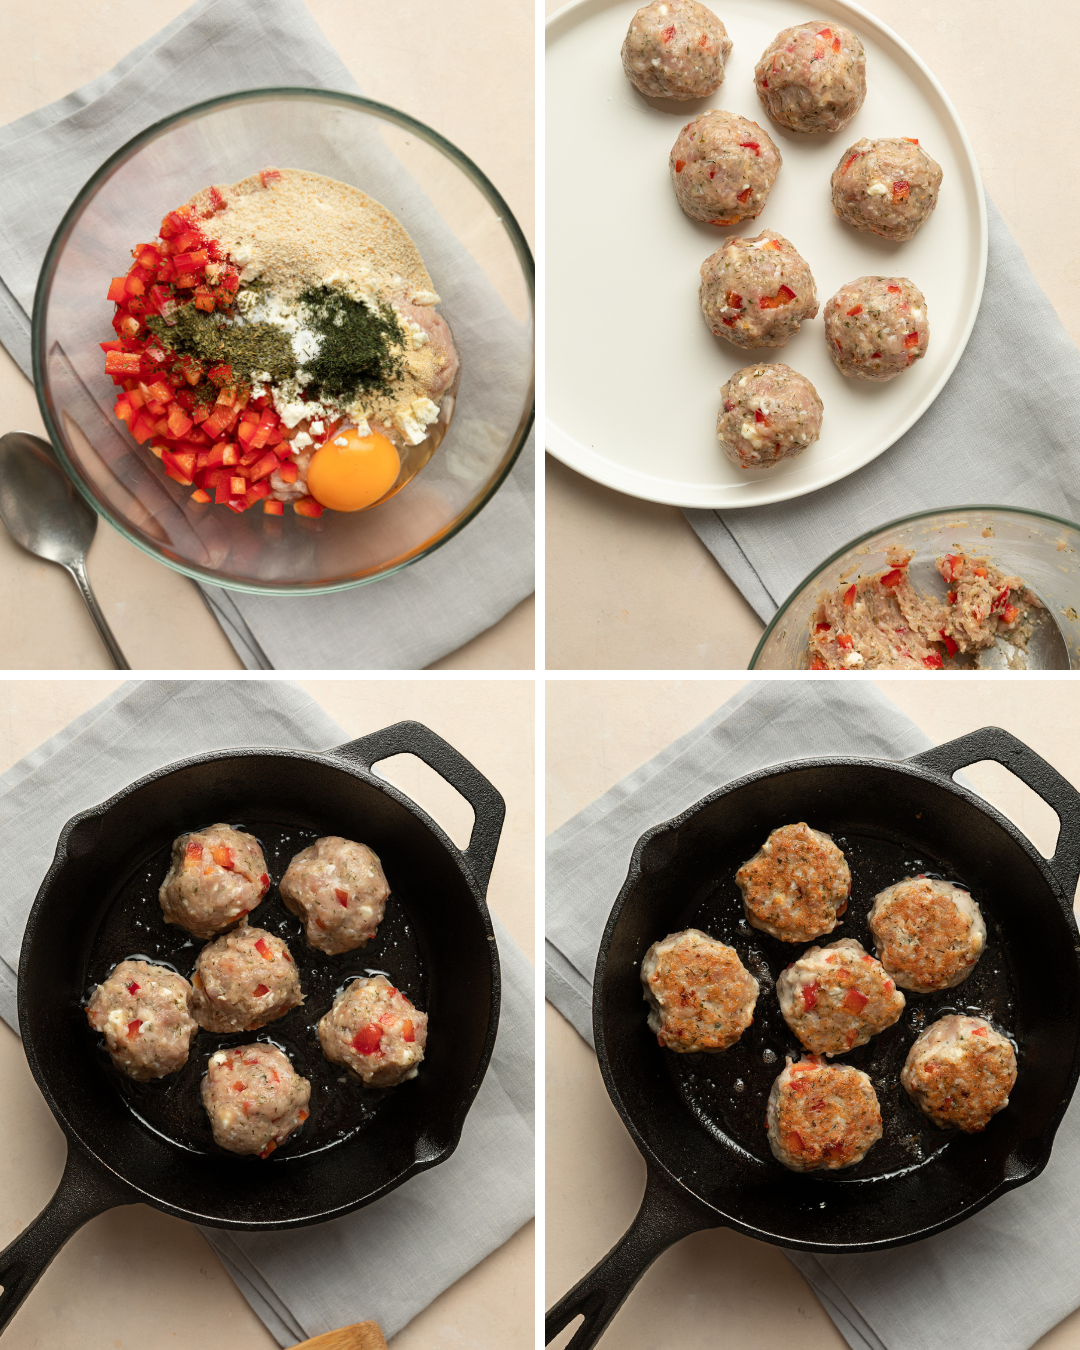 Step by step assembly of Greek meatballs